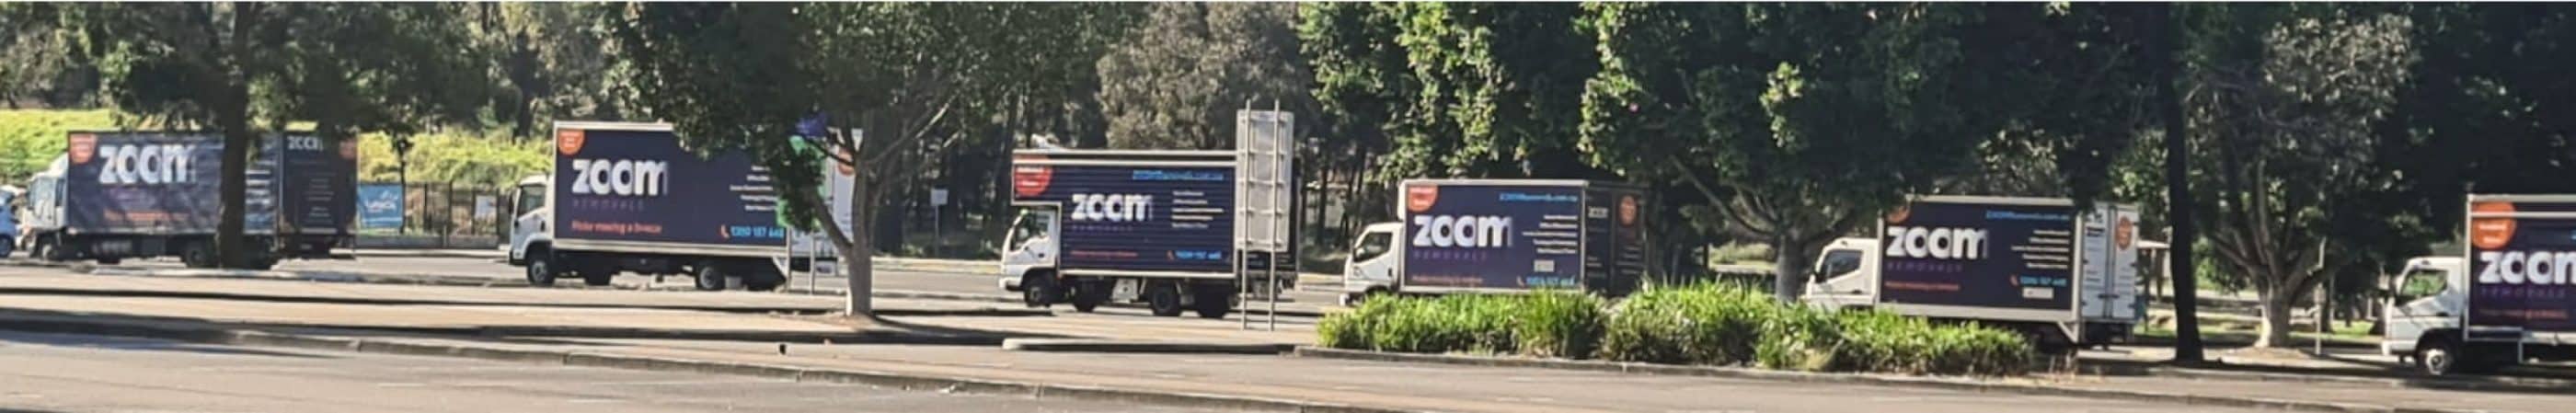 ZOOM Removals Moving Trucks